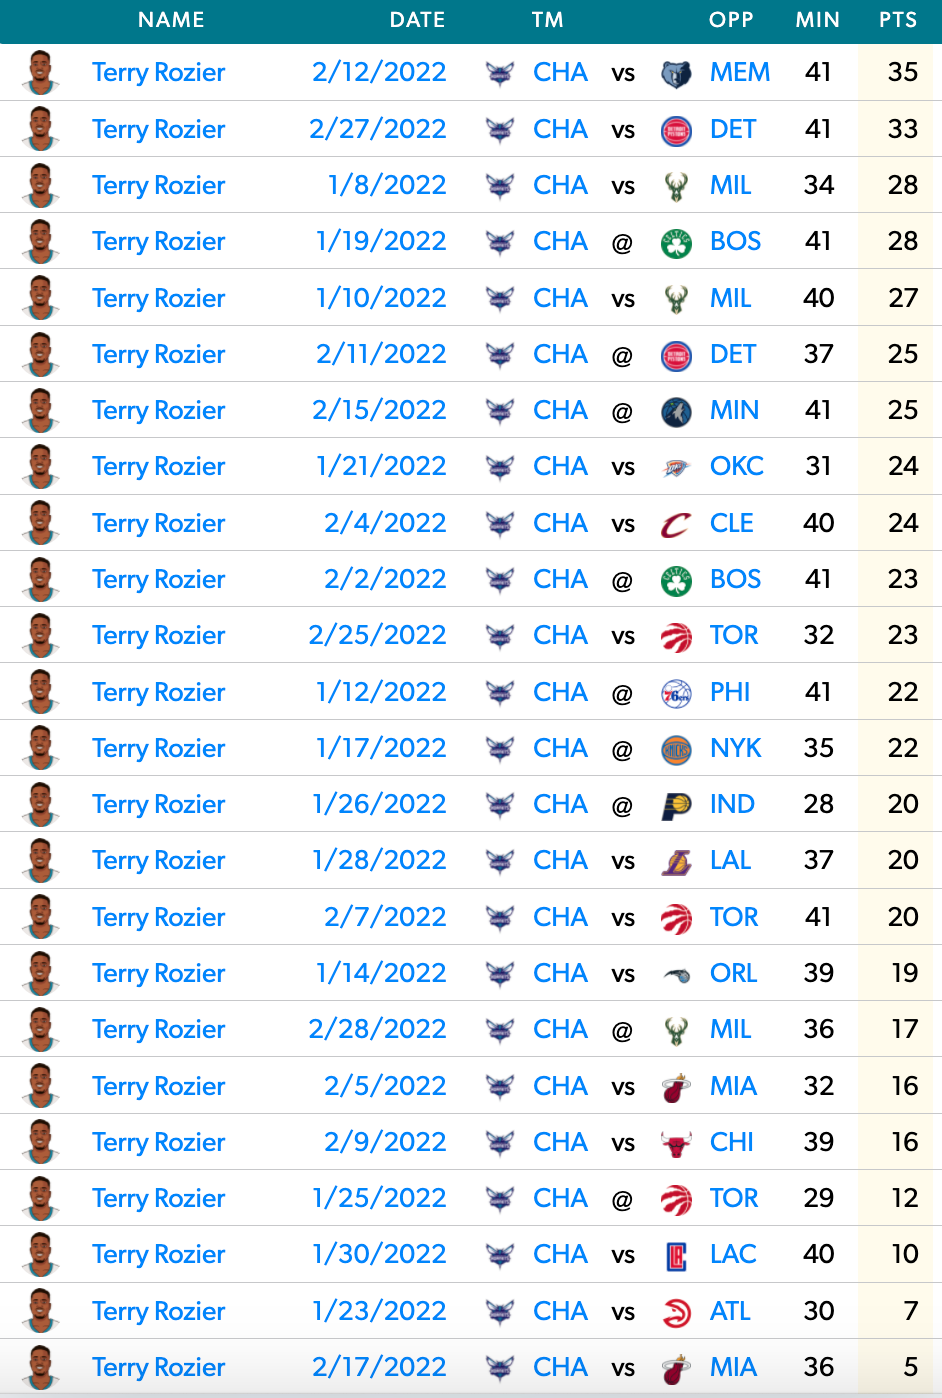 Rozier's Game Log since January 8th.